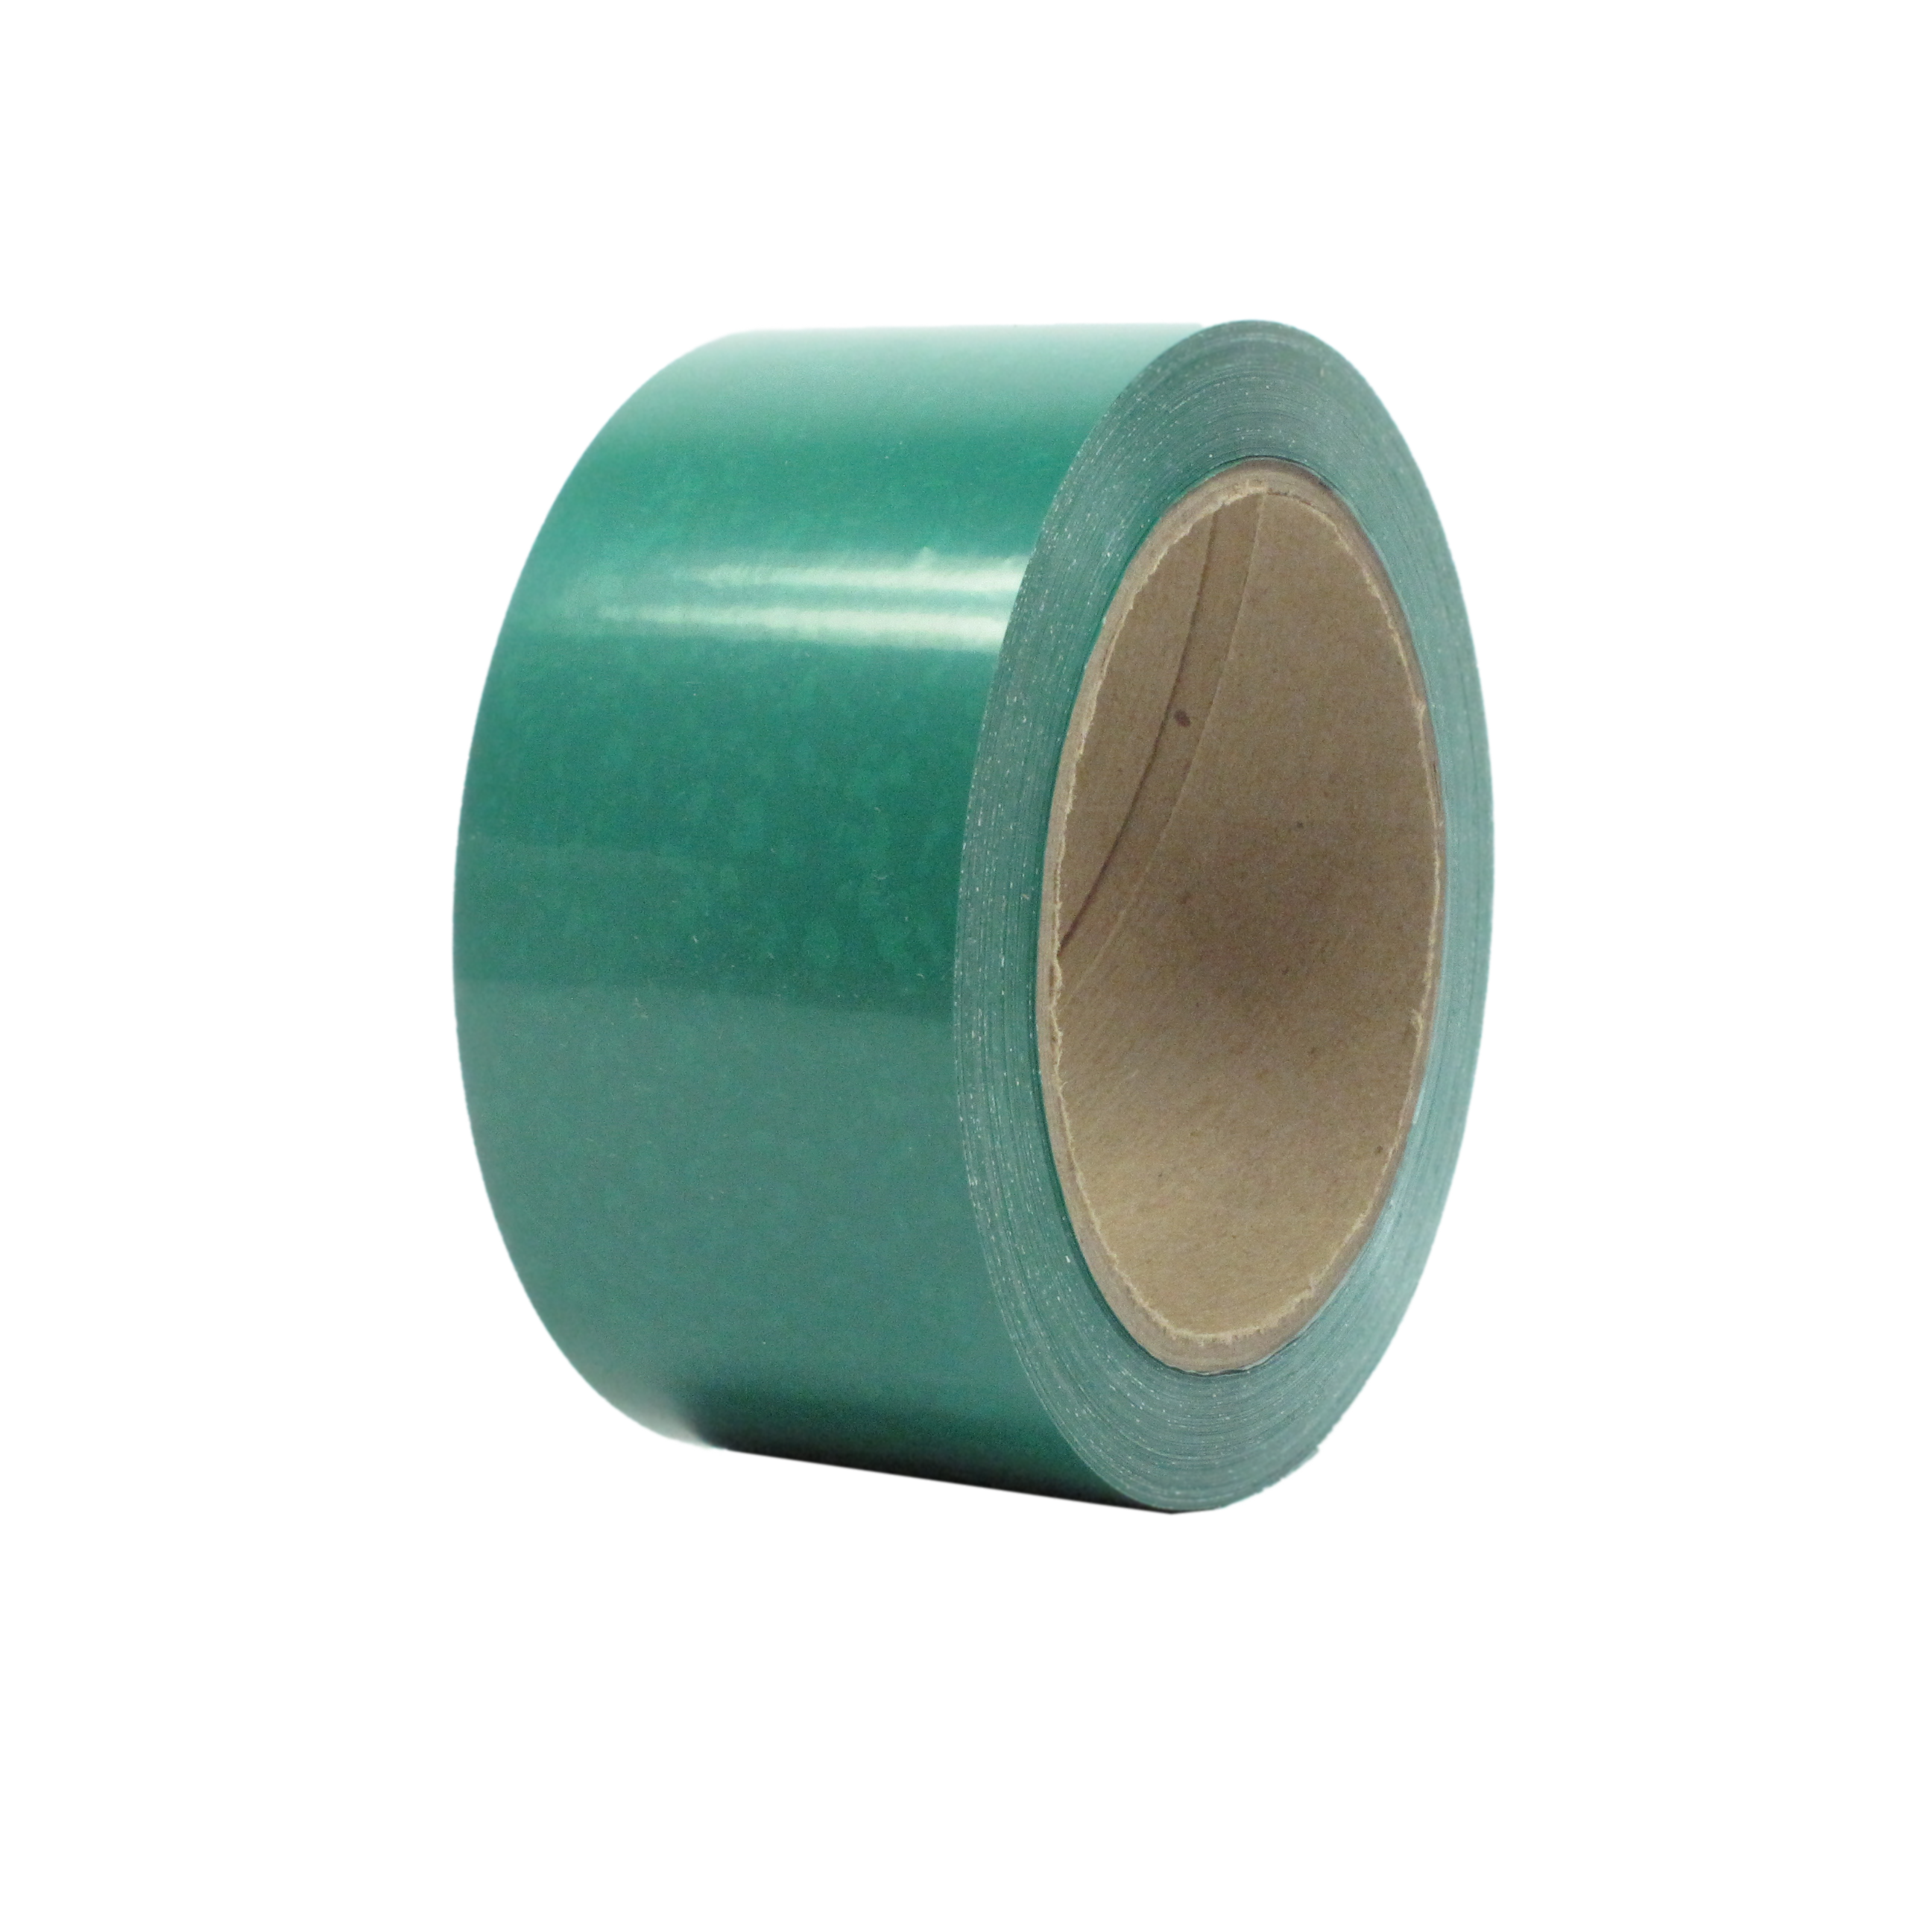 Monta High Quality Carton Sealing PVC Tape with Natural Rubber Adhesiv ...